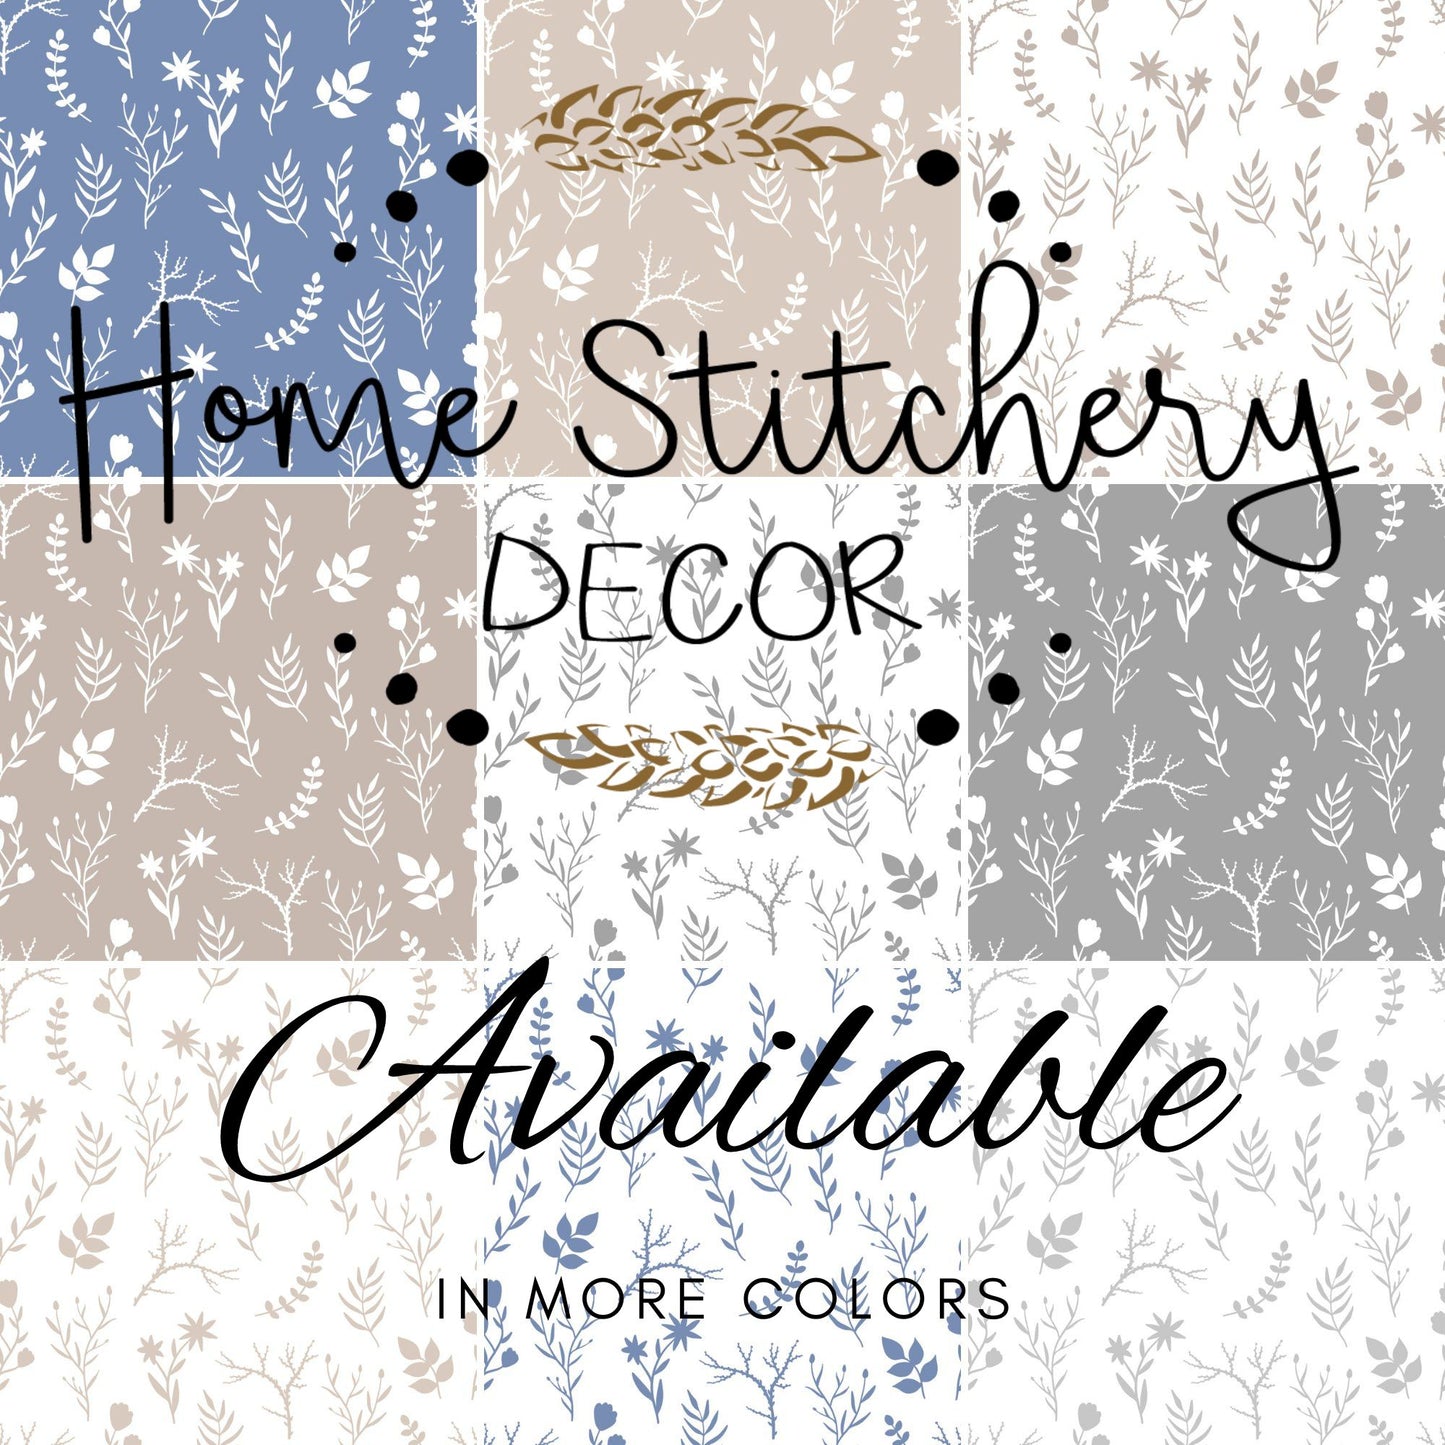 Color options for Home Stitchery Decor Bedding. Part of a mix and match collection of modern farm styled products. Shop the collections or follow along on the Home Stitchery Decor YouTube Channel.